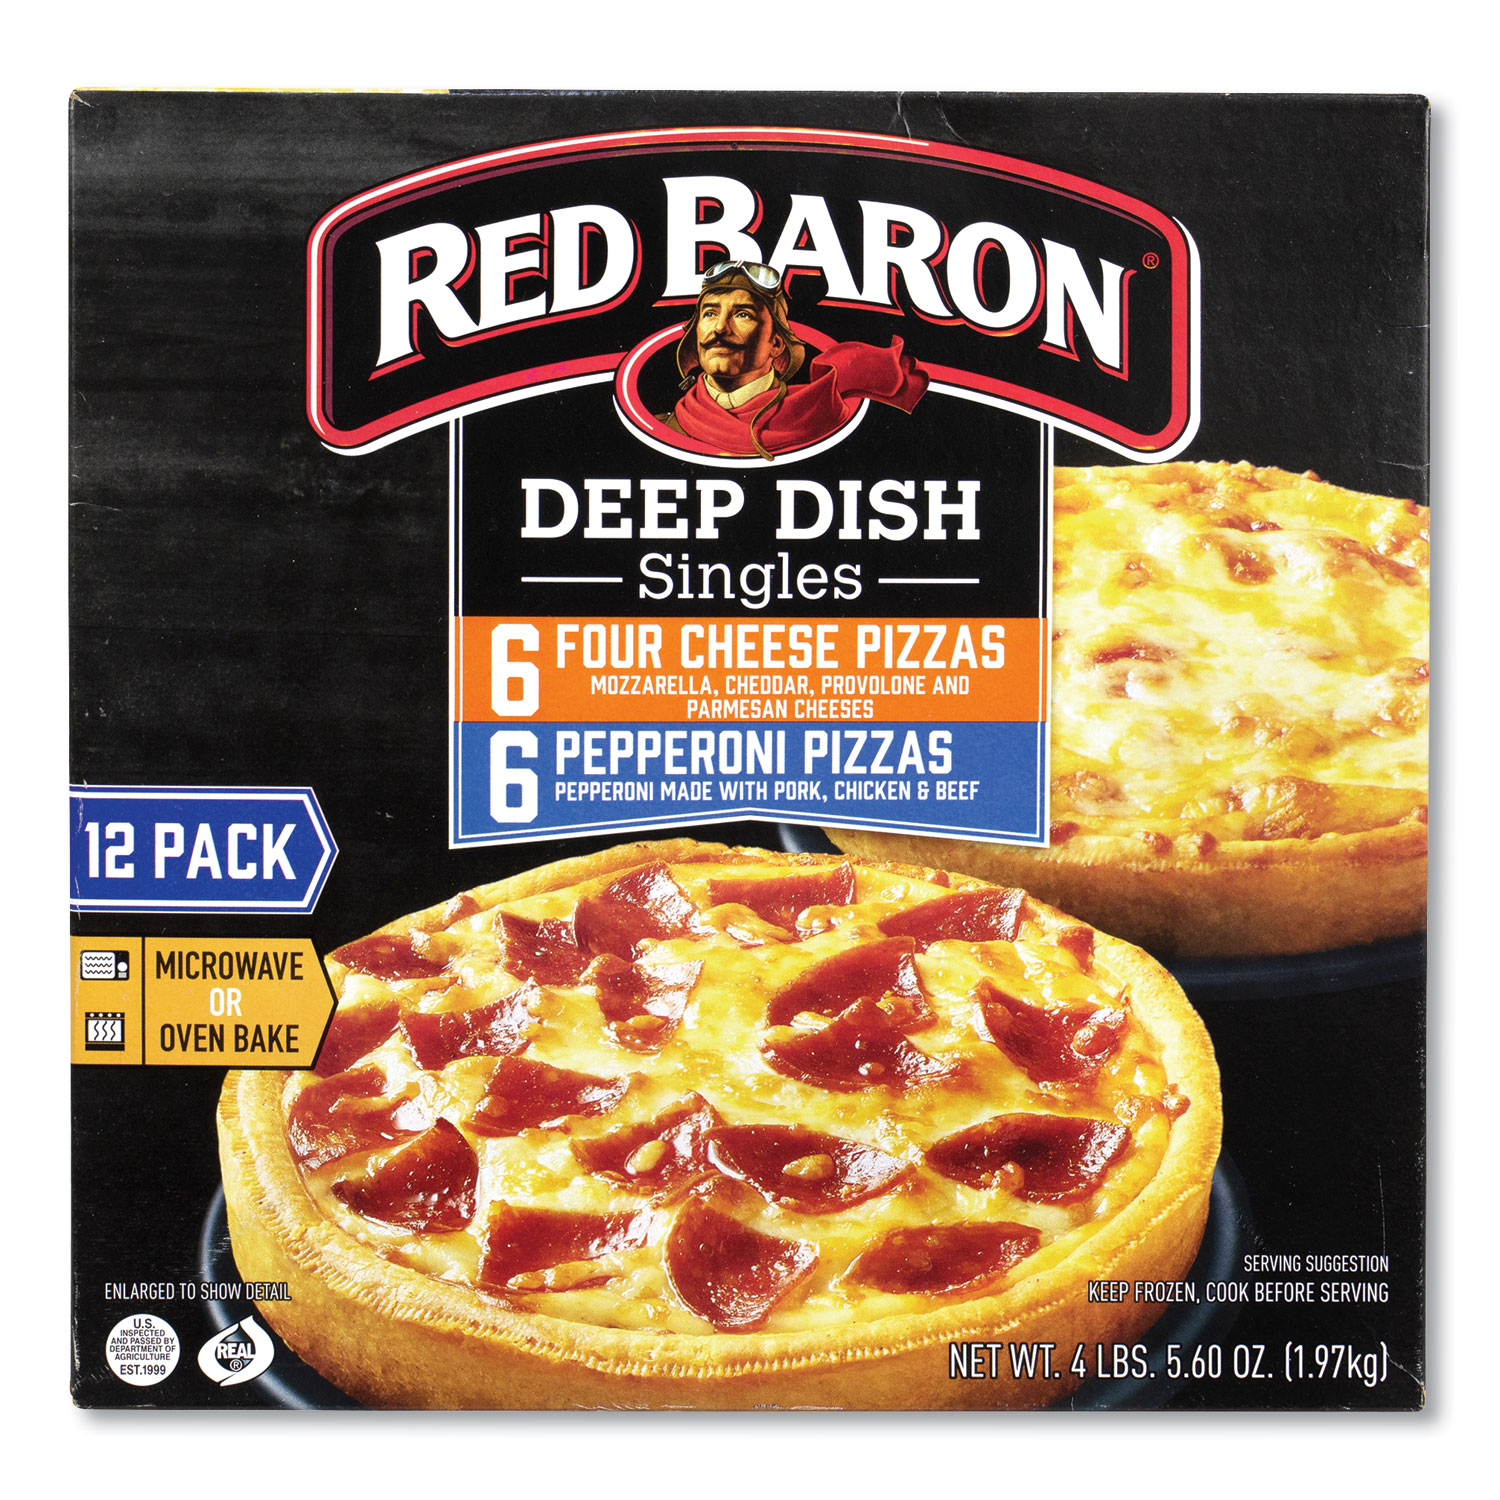  Red Baron 74924 Deep Dish Pizza Singles Variety Pack, Four Cheese/Pepperoni, 5.5 oz Pack, 12 Packs/Box, Free Delivery in 1-4 Business Days (GRR90300007) 